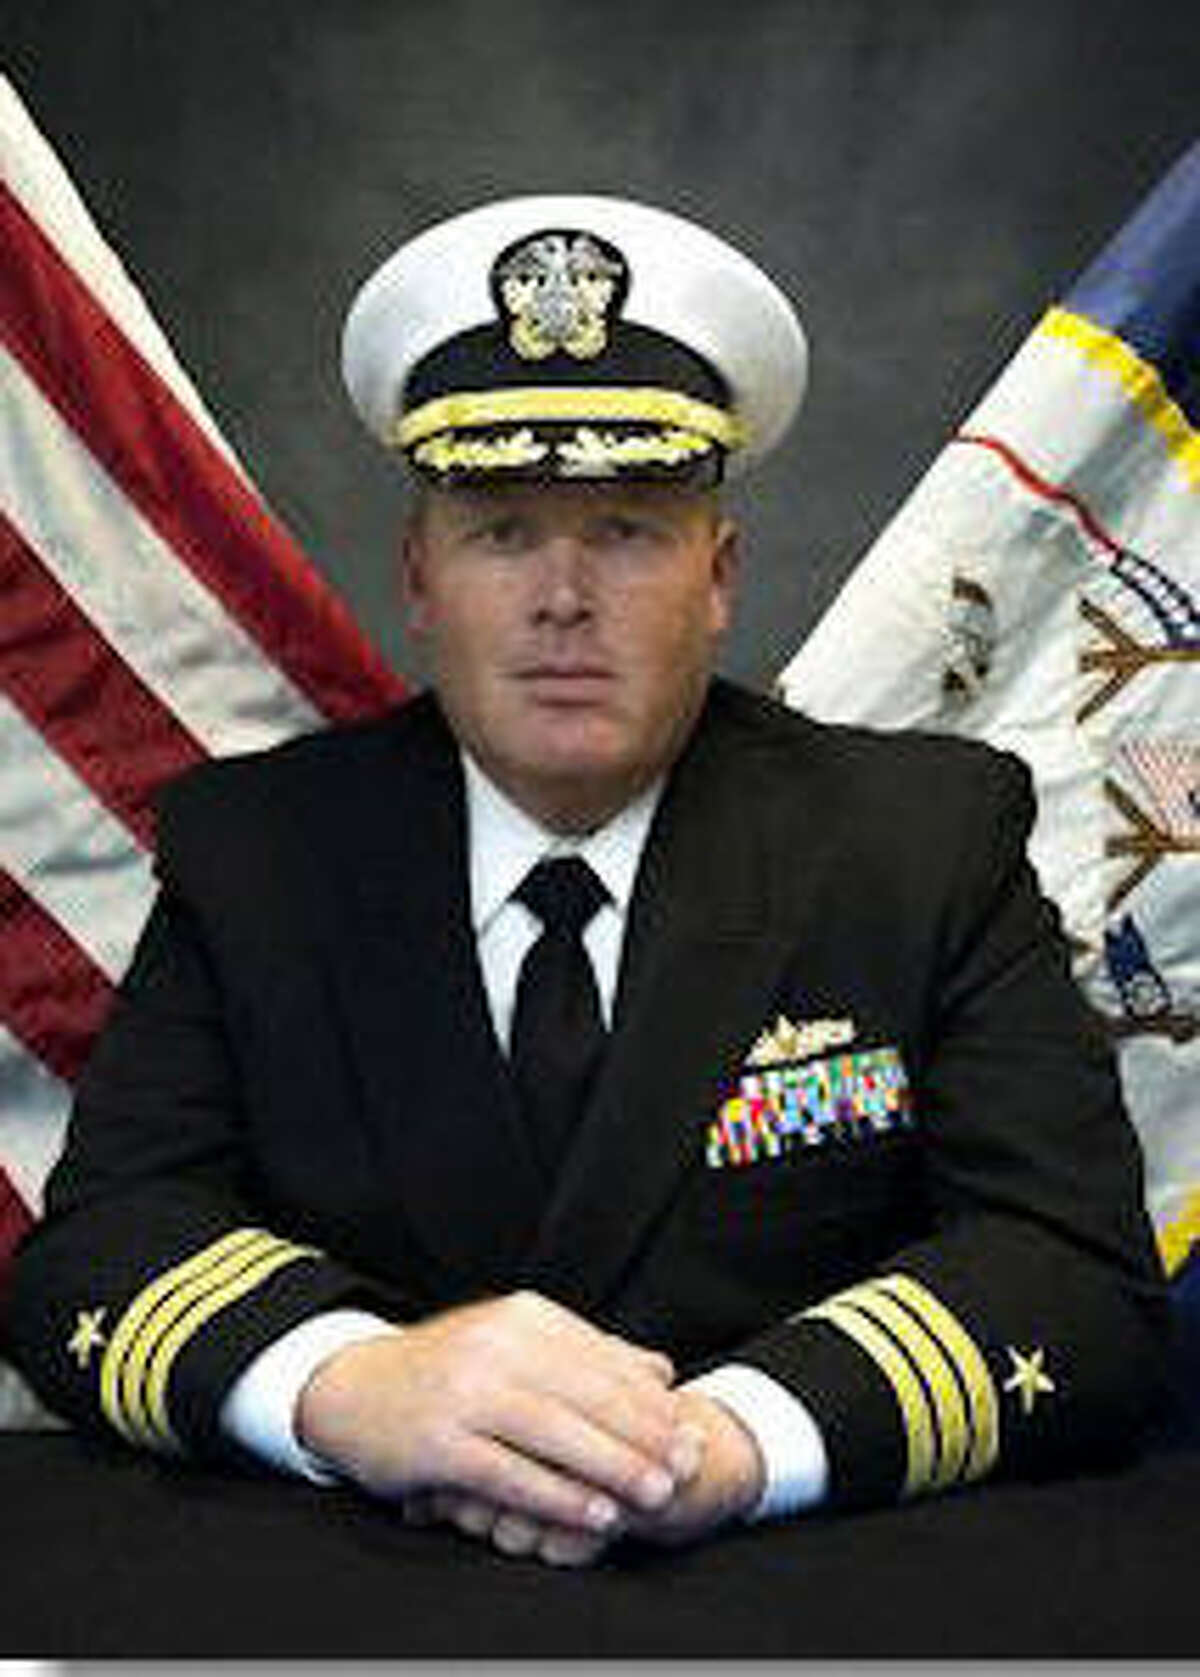 Caldwell is captain of the USS Ross, one of the Navy destroyers that launched the cruise missile strikes into Syria.